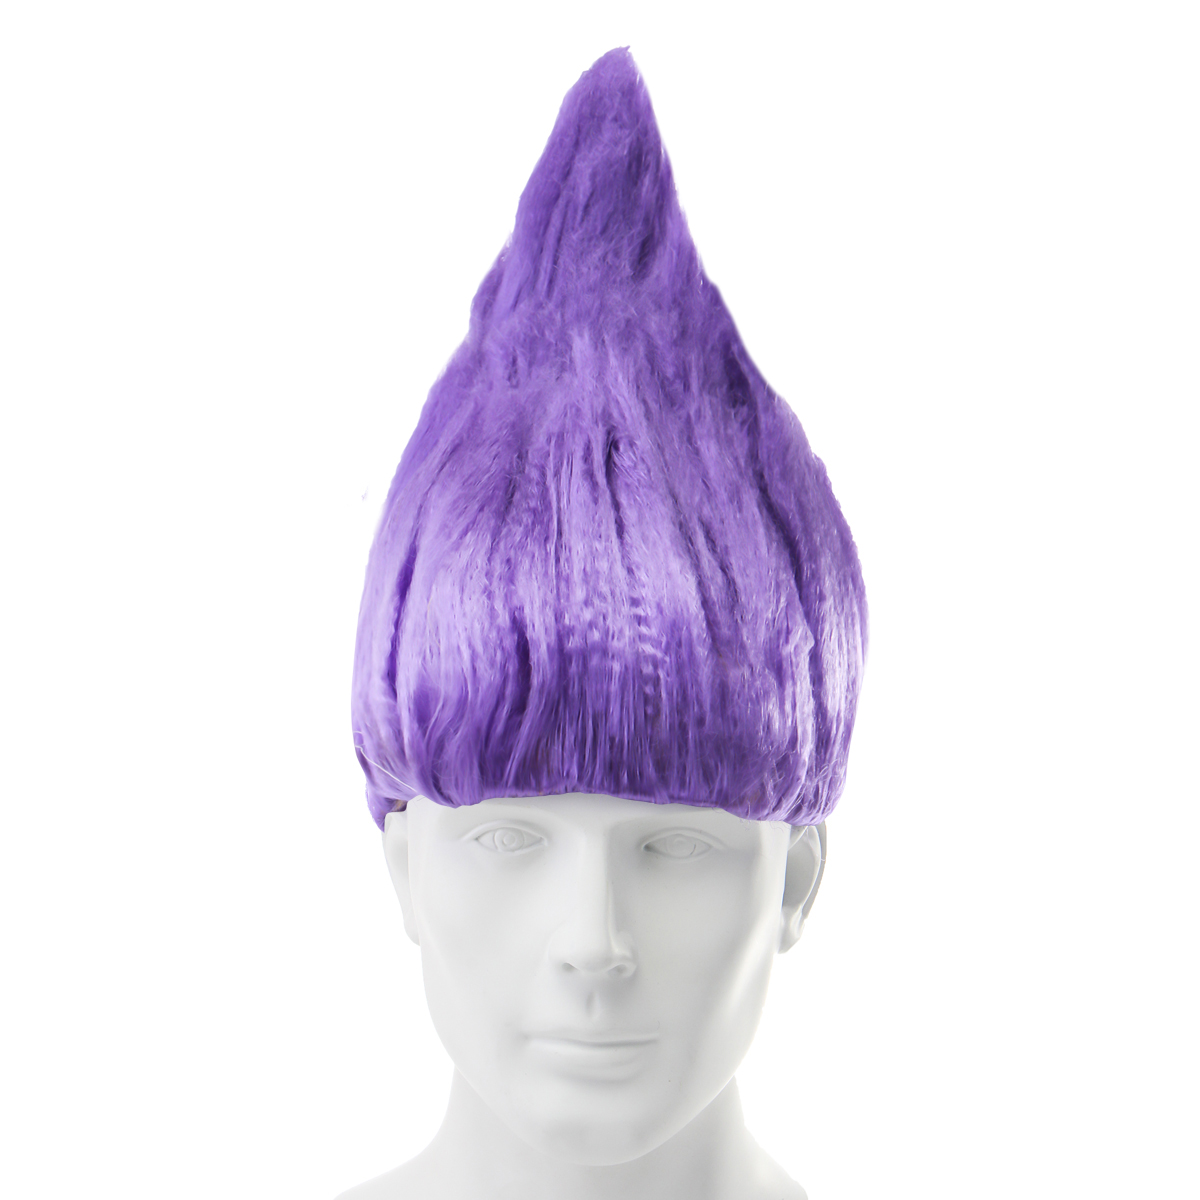 Elf-Flames-Shaped-Hair-Wig-Halloween-Colorful-Party-Cosplay-Masquerade-Dressing-Wigs-1187869-3